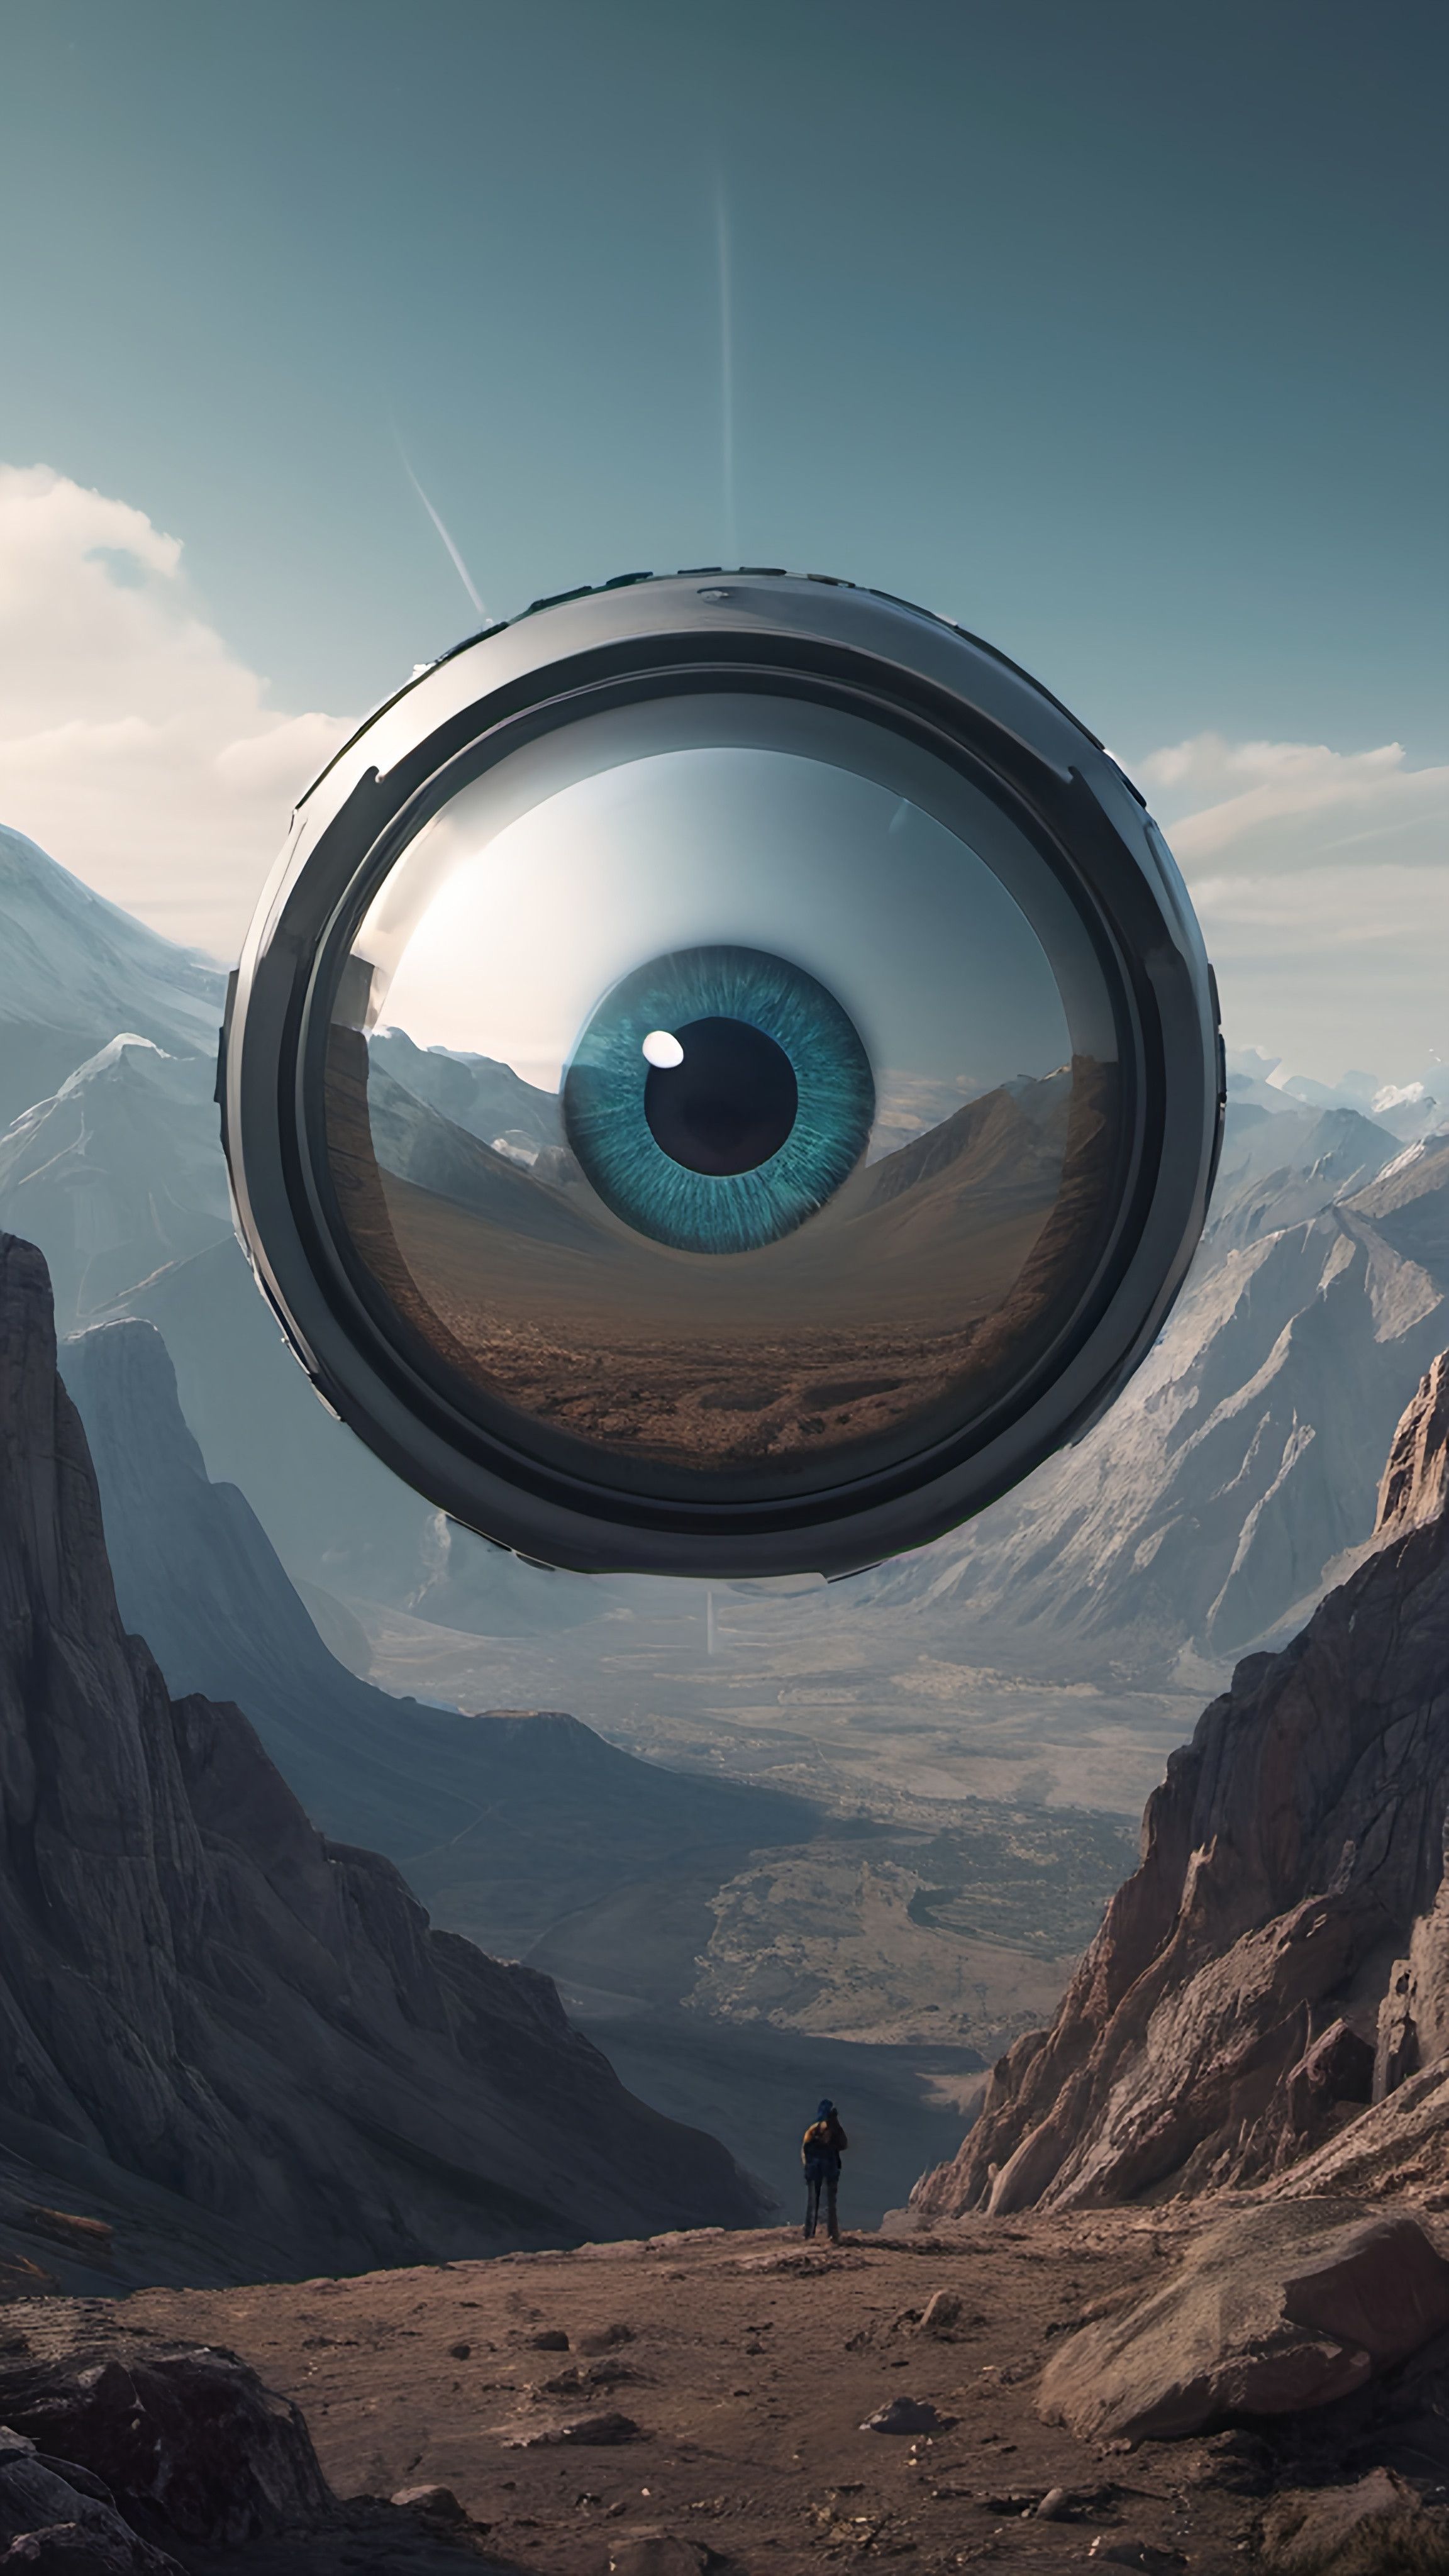 Prompt: a man standing on a mountain looking at an eyeball in the sky above him, with mountains in the background